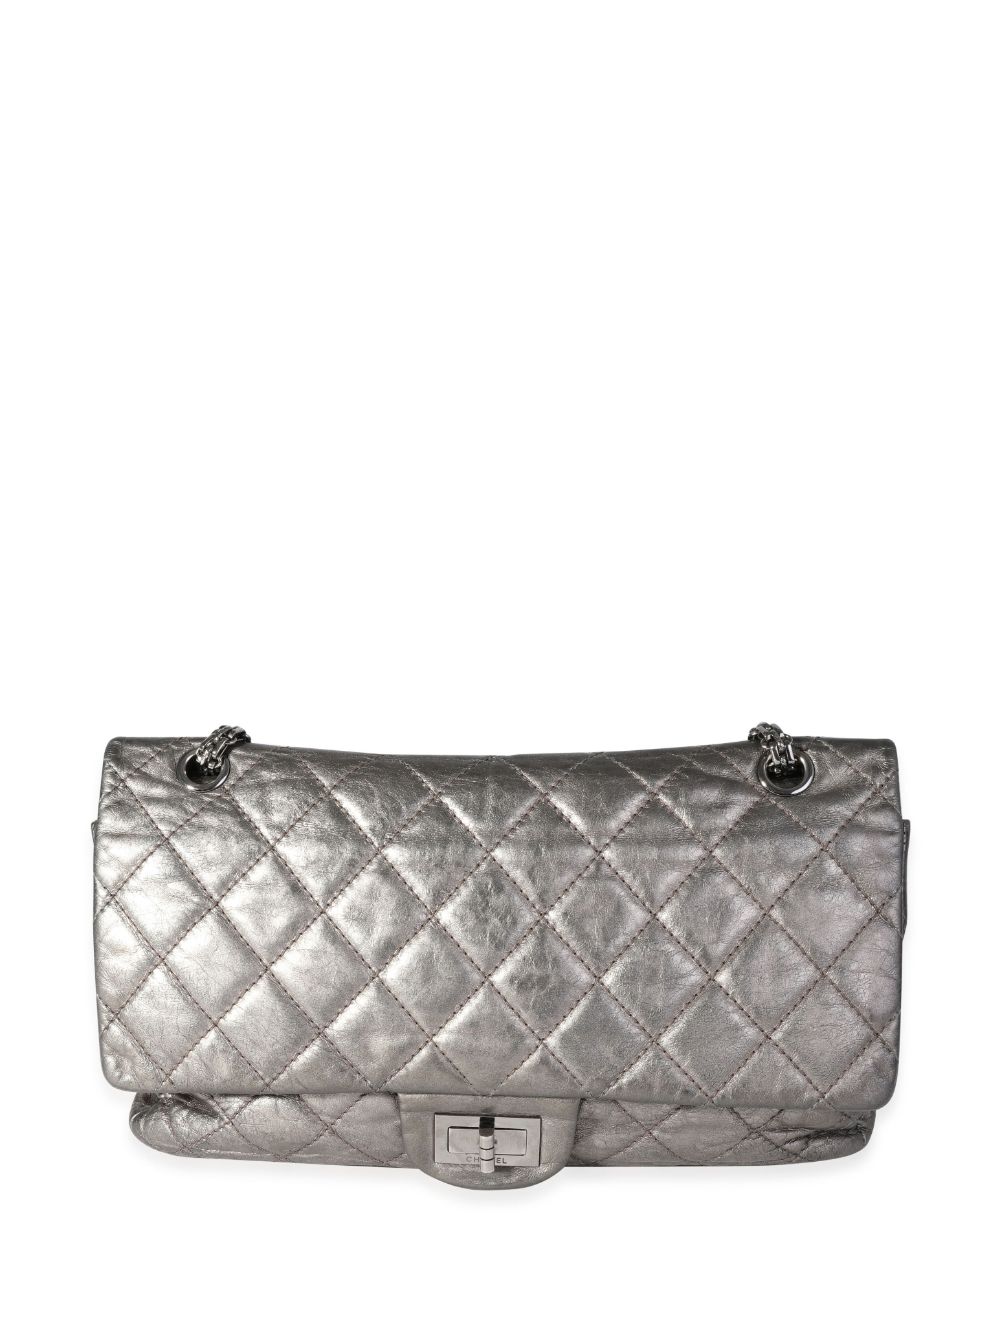 CHANEL Pre-Owned 2008 2.55 Reissue shoulder bag - Silver von CHANEL Pre-Owned